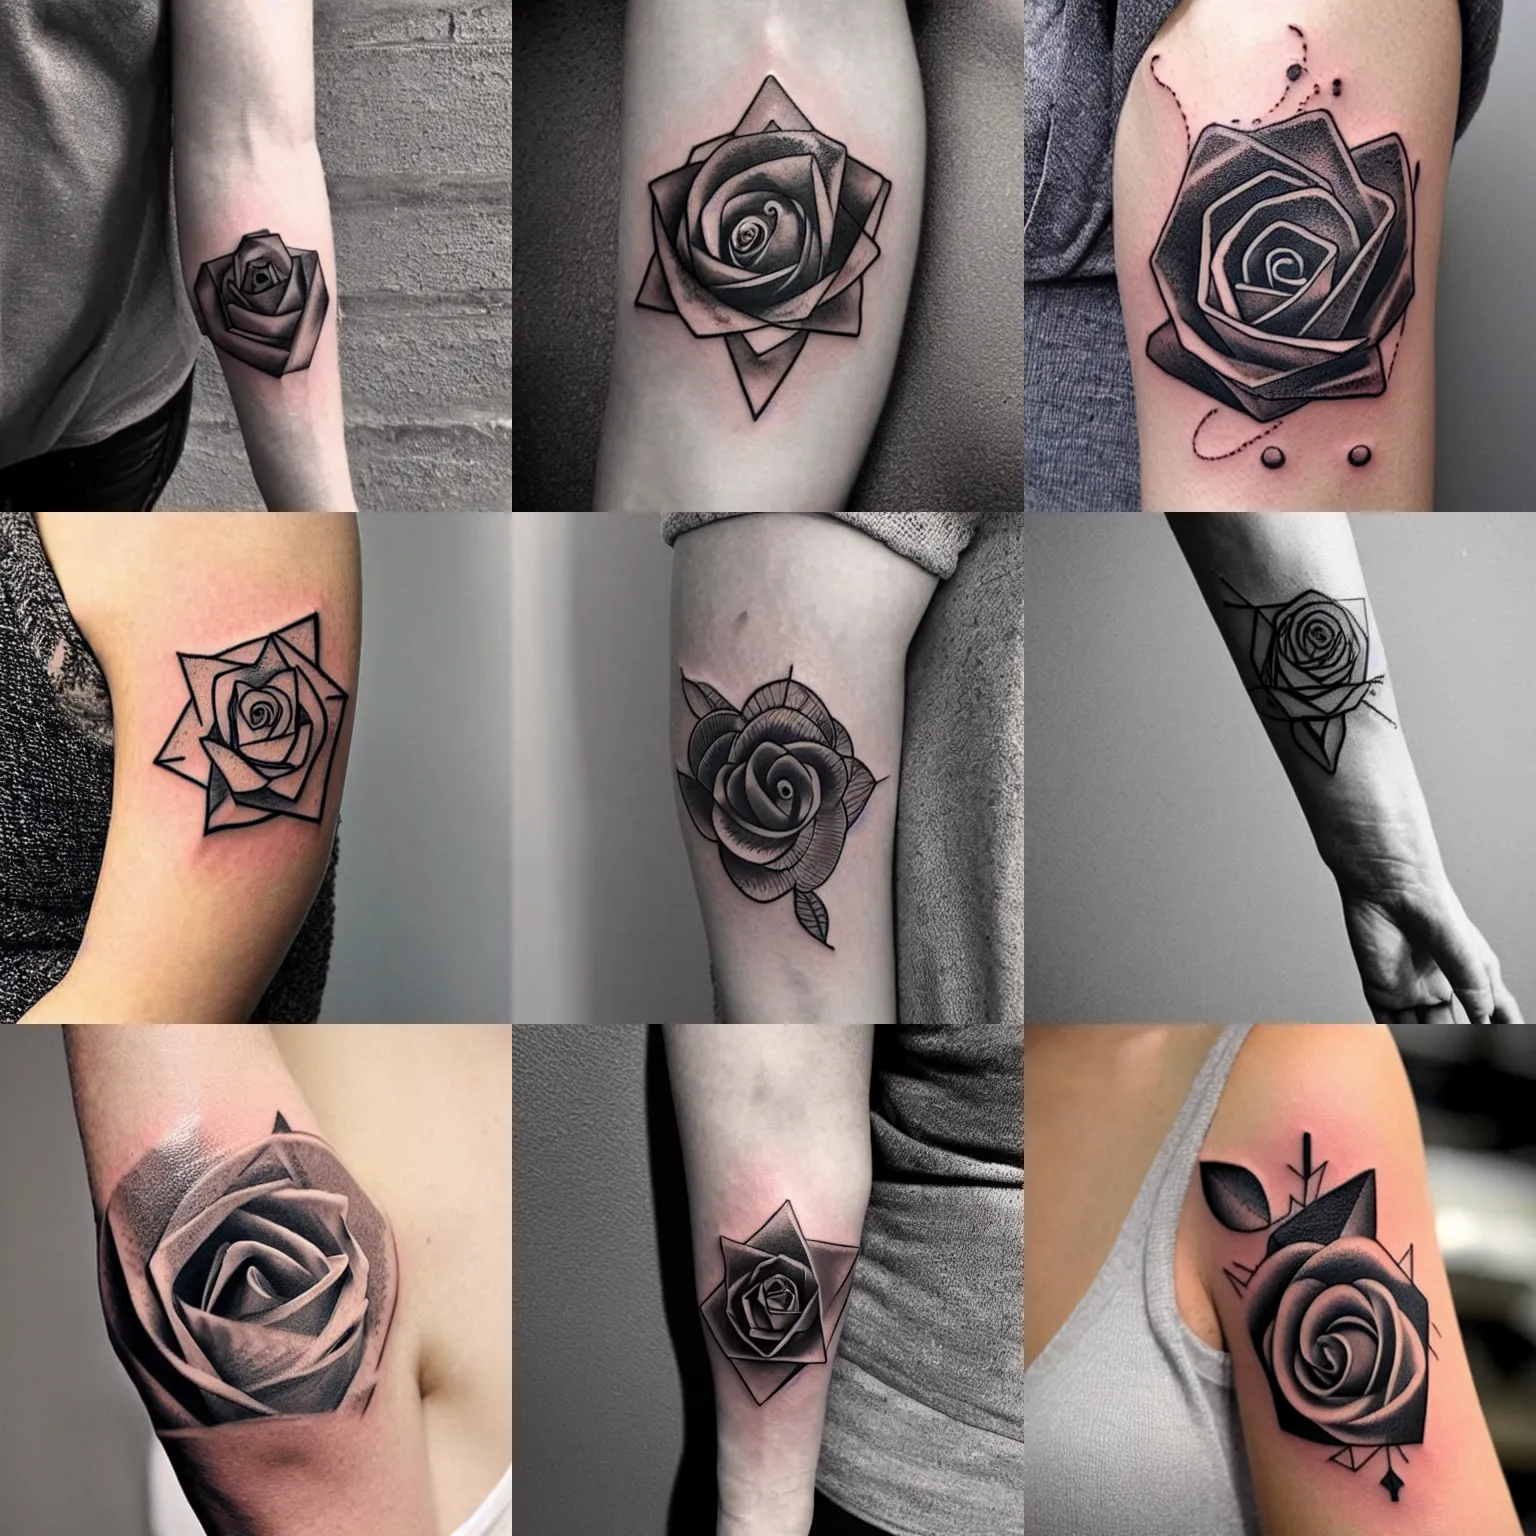 Rose tattoo - Visions Tattoo and Piercing